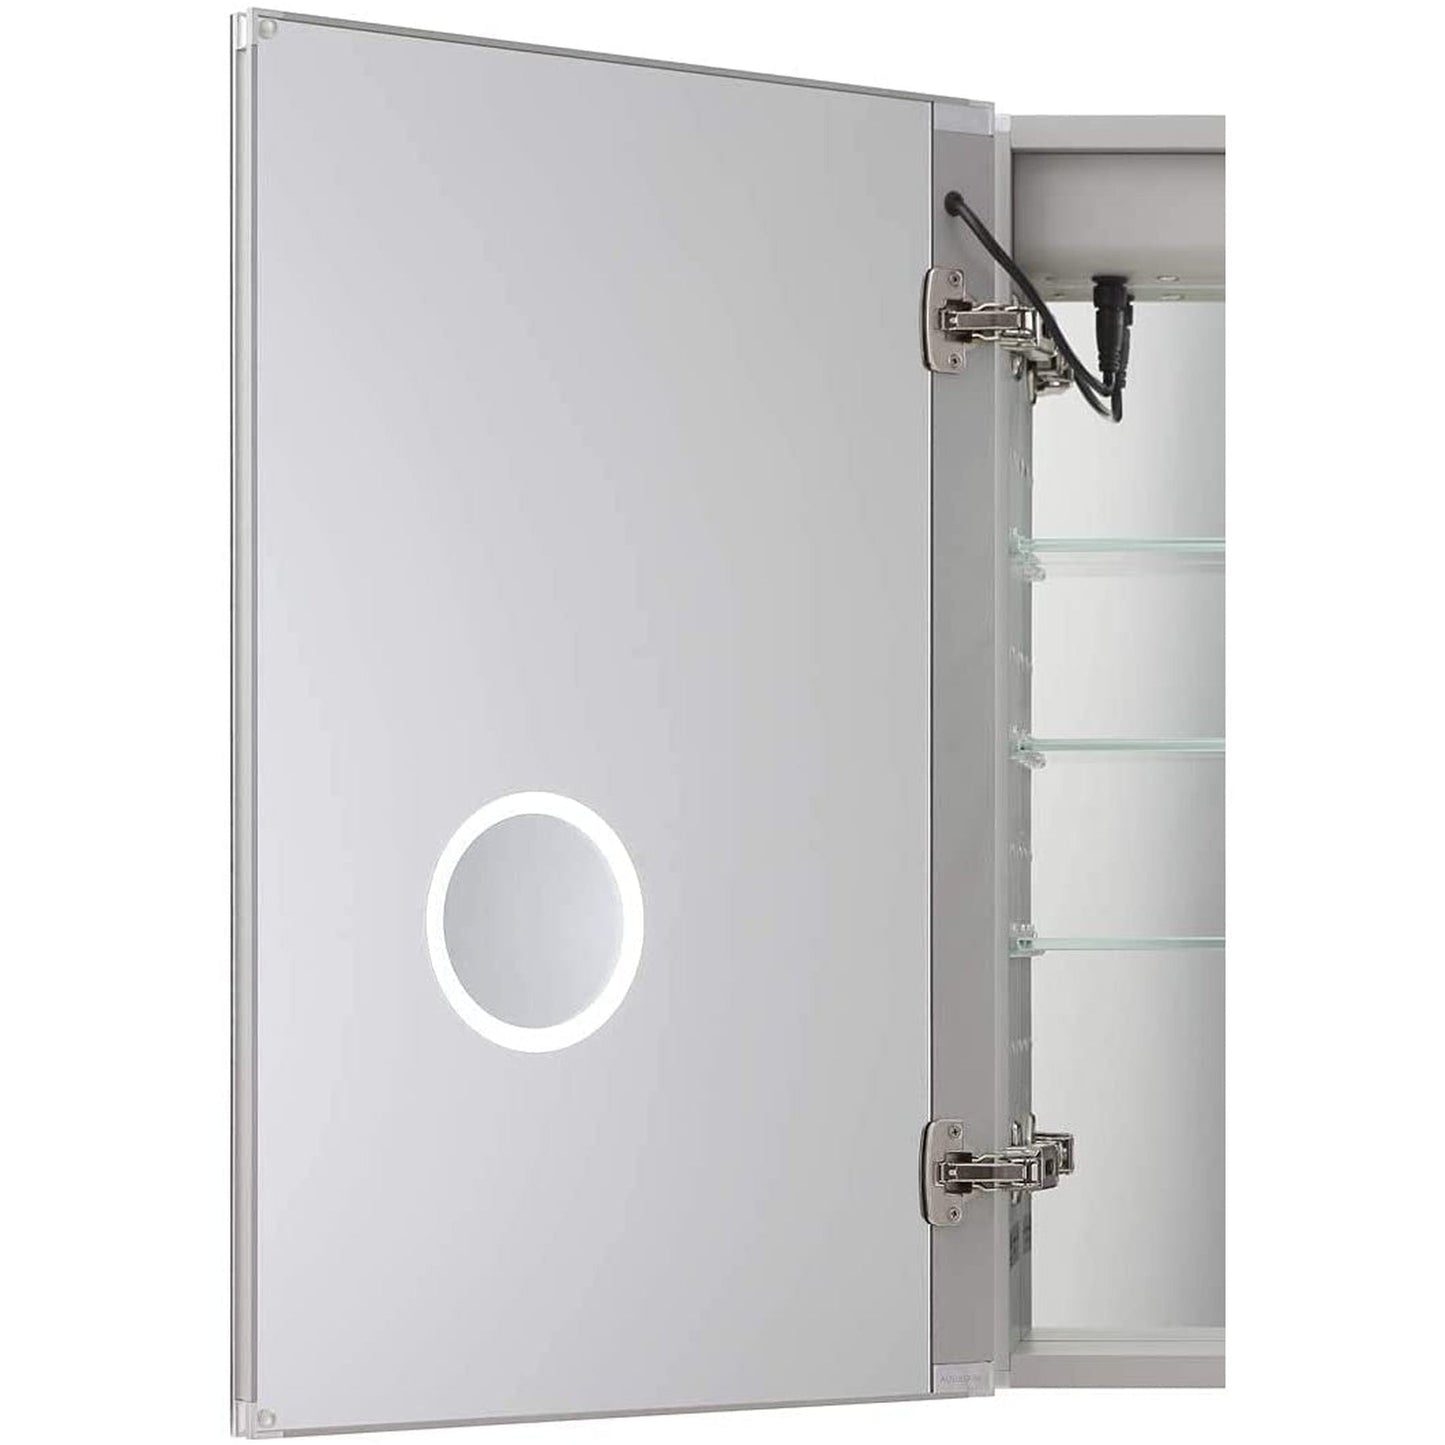 Aquadom Royale Plus 48" x 36" Rectangle Recessed or Surface Mount Bi-View LED Lighted Bathroom Medicine Cabinet With Defogger, Electrical Outlet, Magnifying Mirror